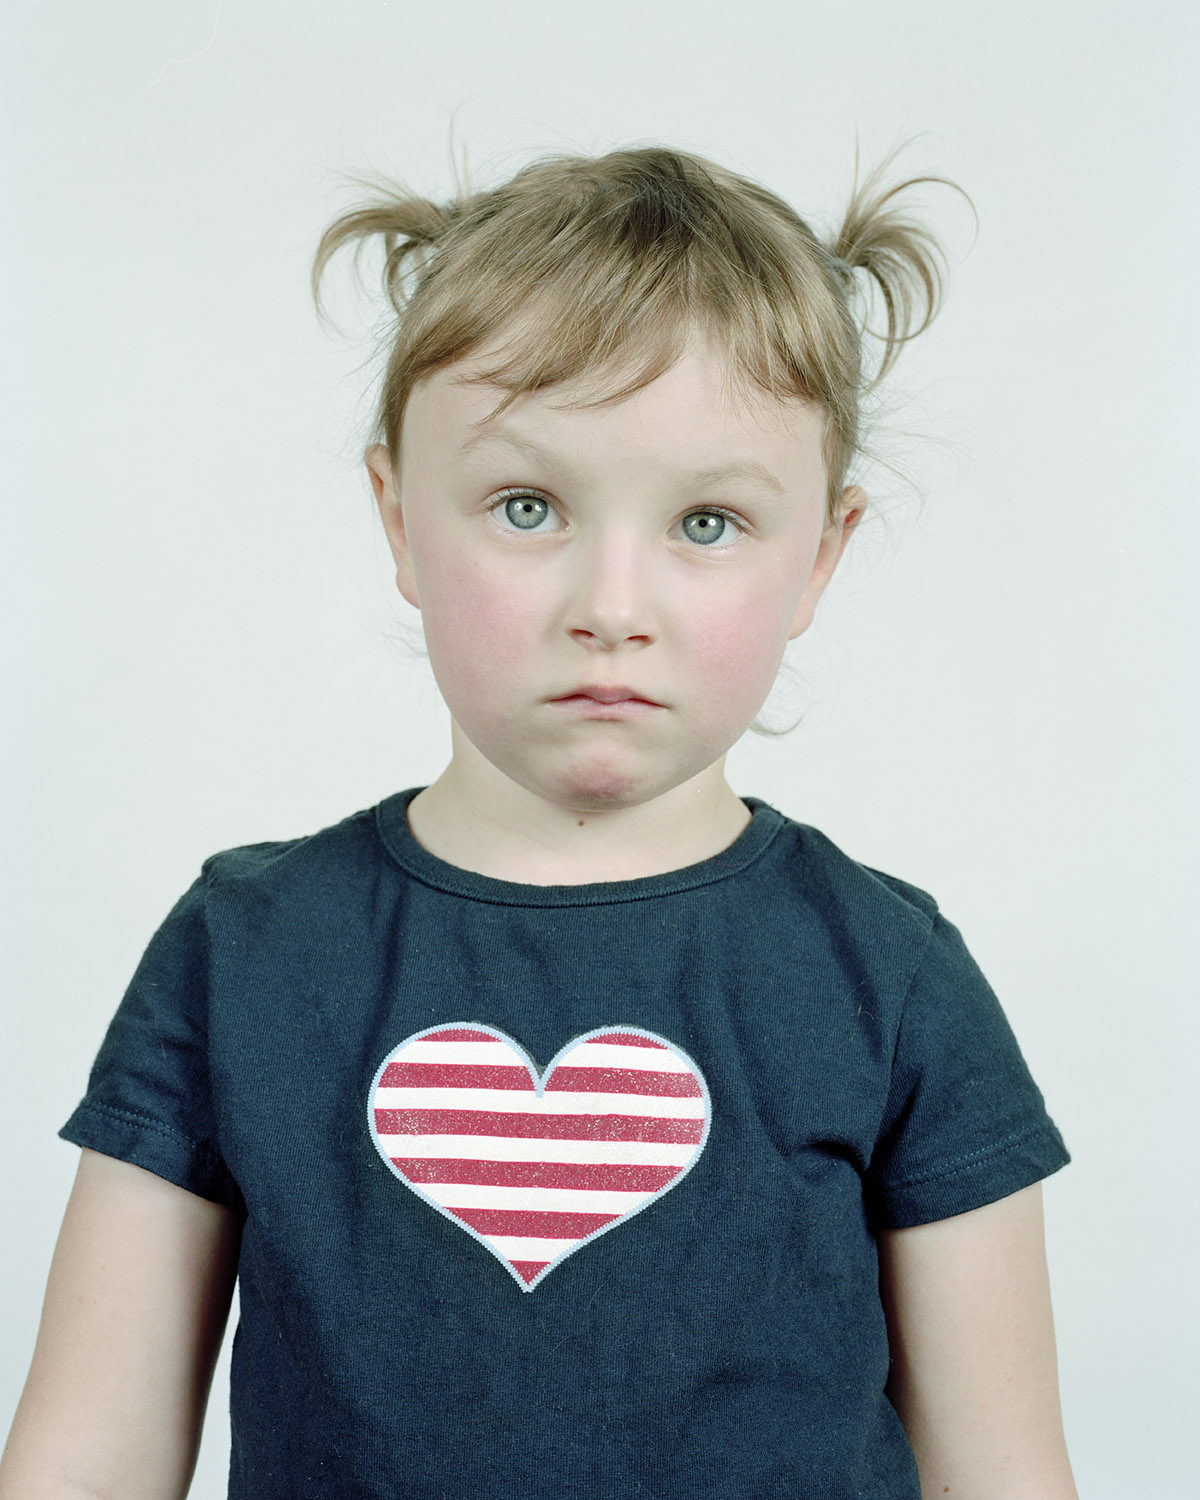  Skylar Sowatskey, aged three, poses for a portrait near her home inConnoquenessing Township, PA on 04/30/2012. Her mother claims that their water was contaminated after several Marcellus Shale gas wells were drilled inthe area between 2010 and 2011.